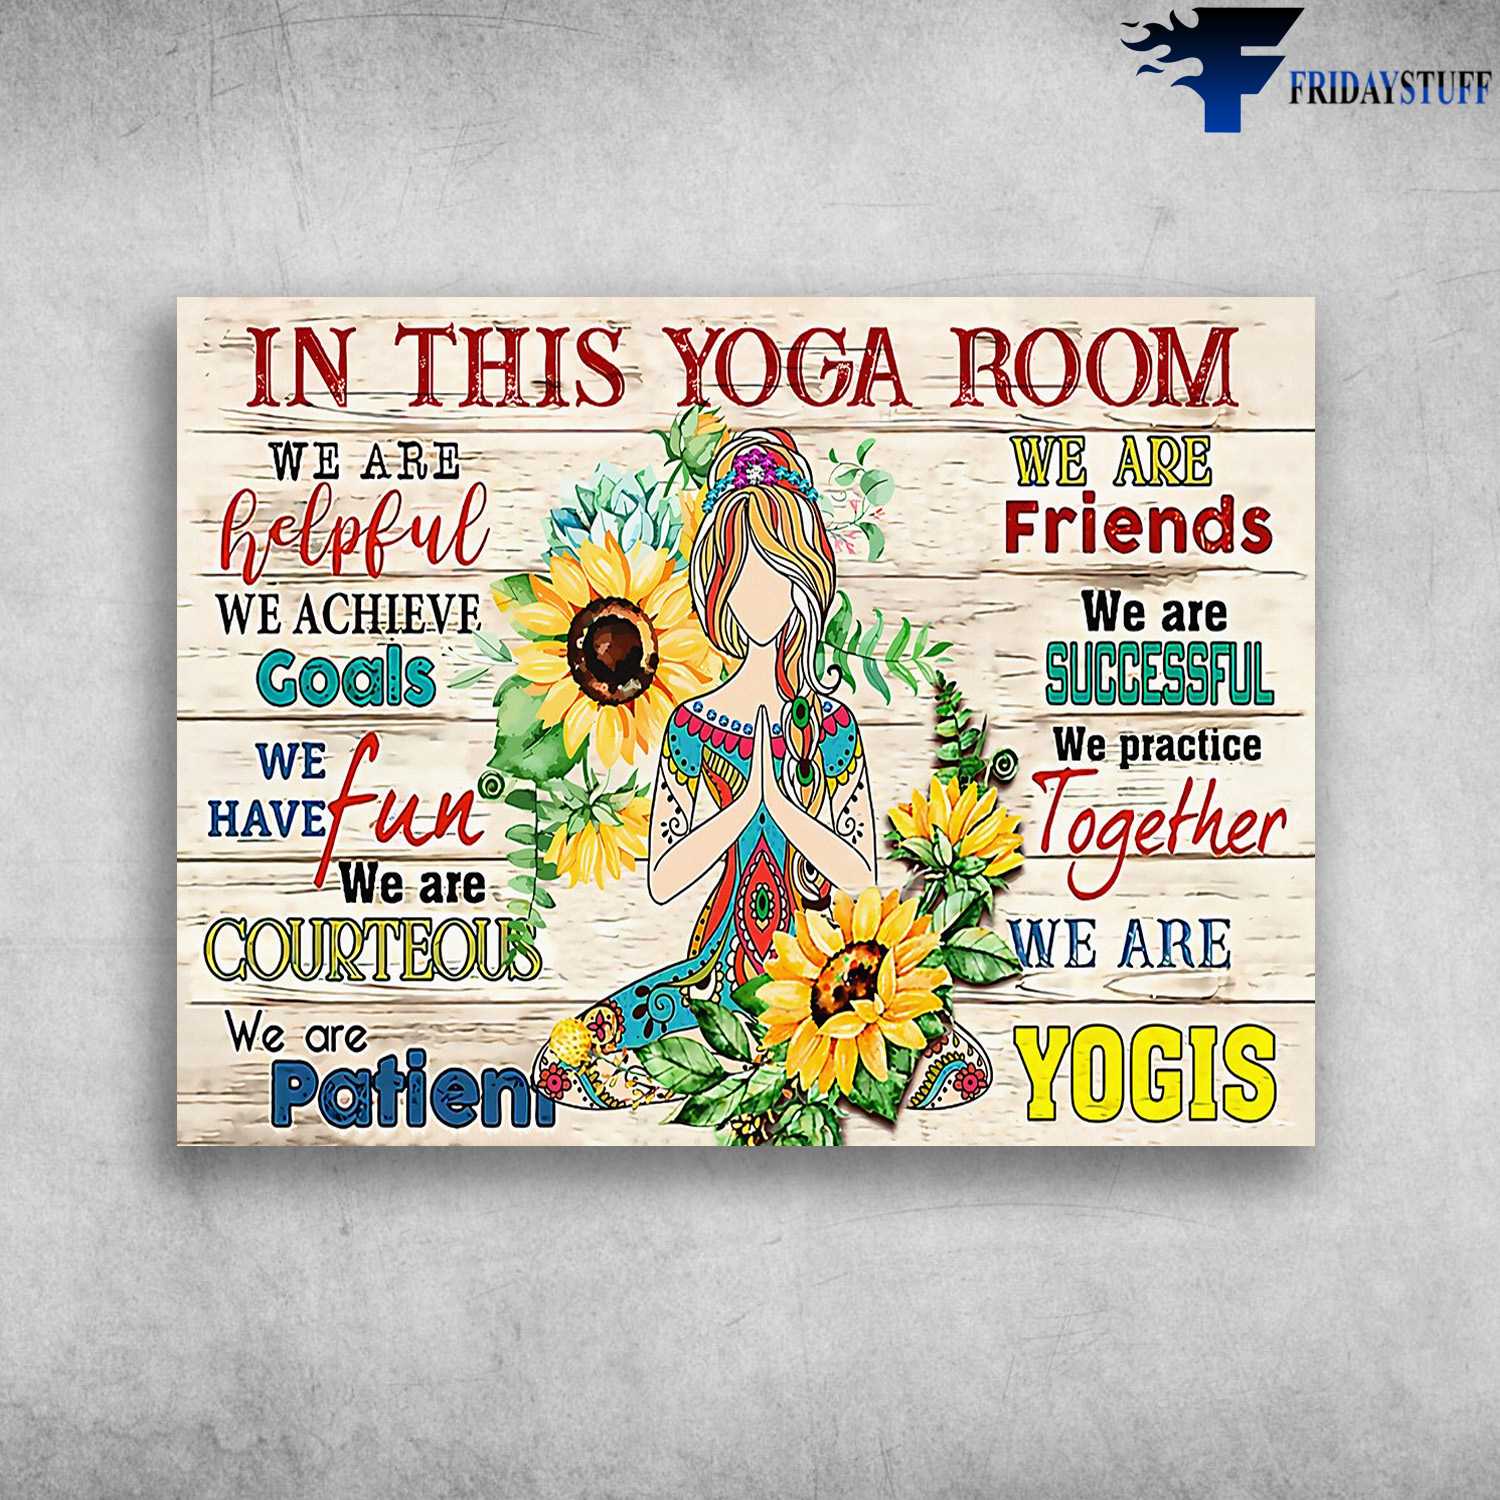 Yoga Room - In This Yoga Room, We Are Helpful, We Achieve Goals, We Have Fun, We Are Courteous, We Are Patieni, We Are Friends, We Are Successful, We Practive Together, We Are Yogis